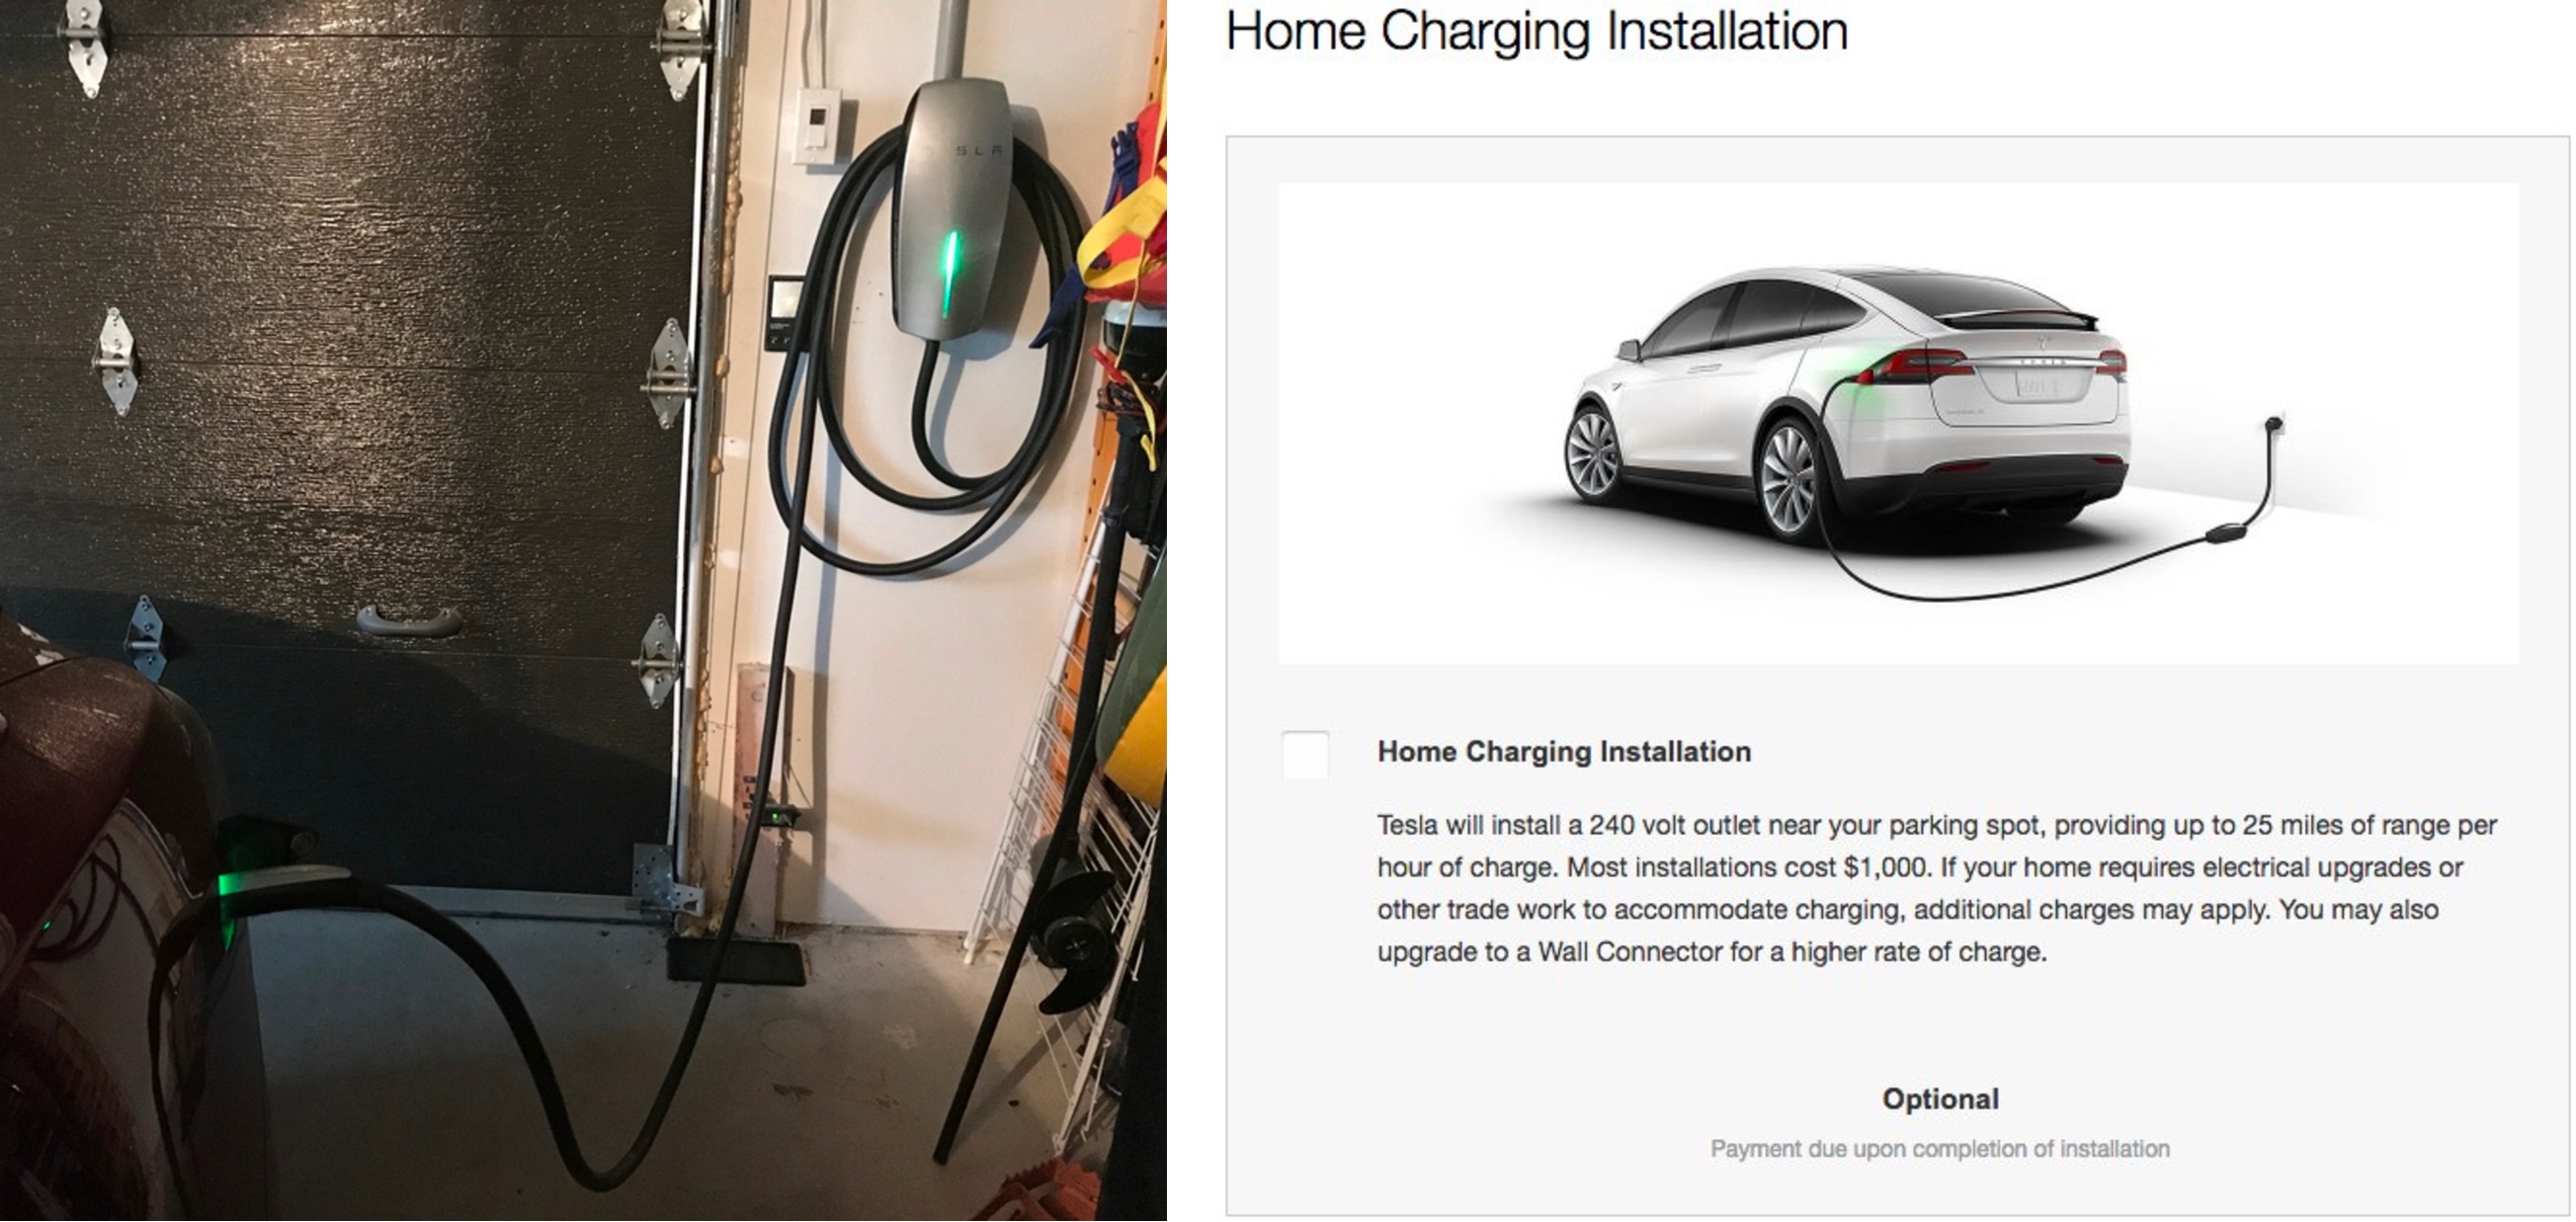 psa-tesla-reduces-price-of-its-home-charger-by-10-electrek